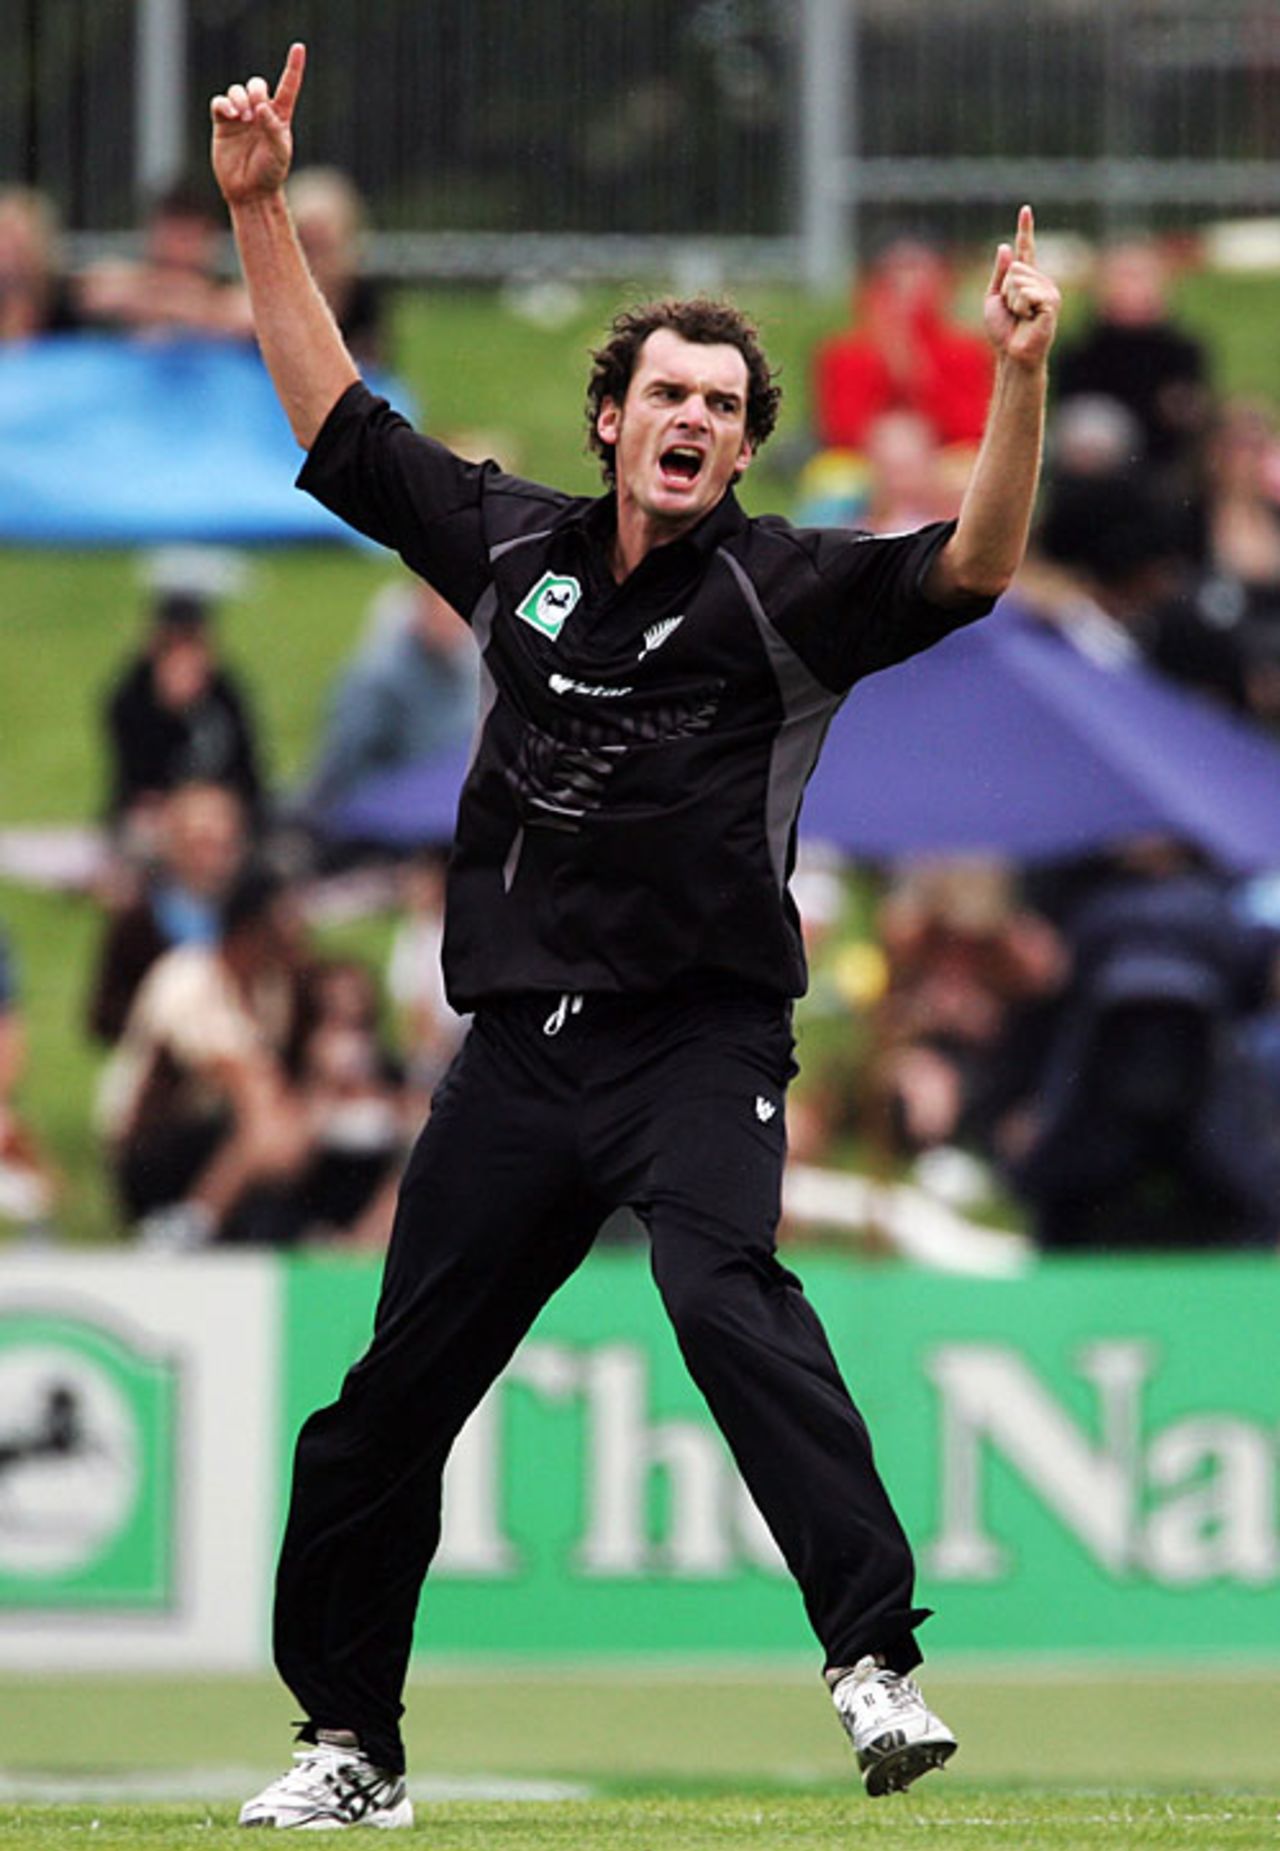 Kyle Mills took three wickets in two overs, New Zealand v Bangladesh, 2nd ODI, Napier, December 28, 2007